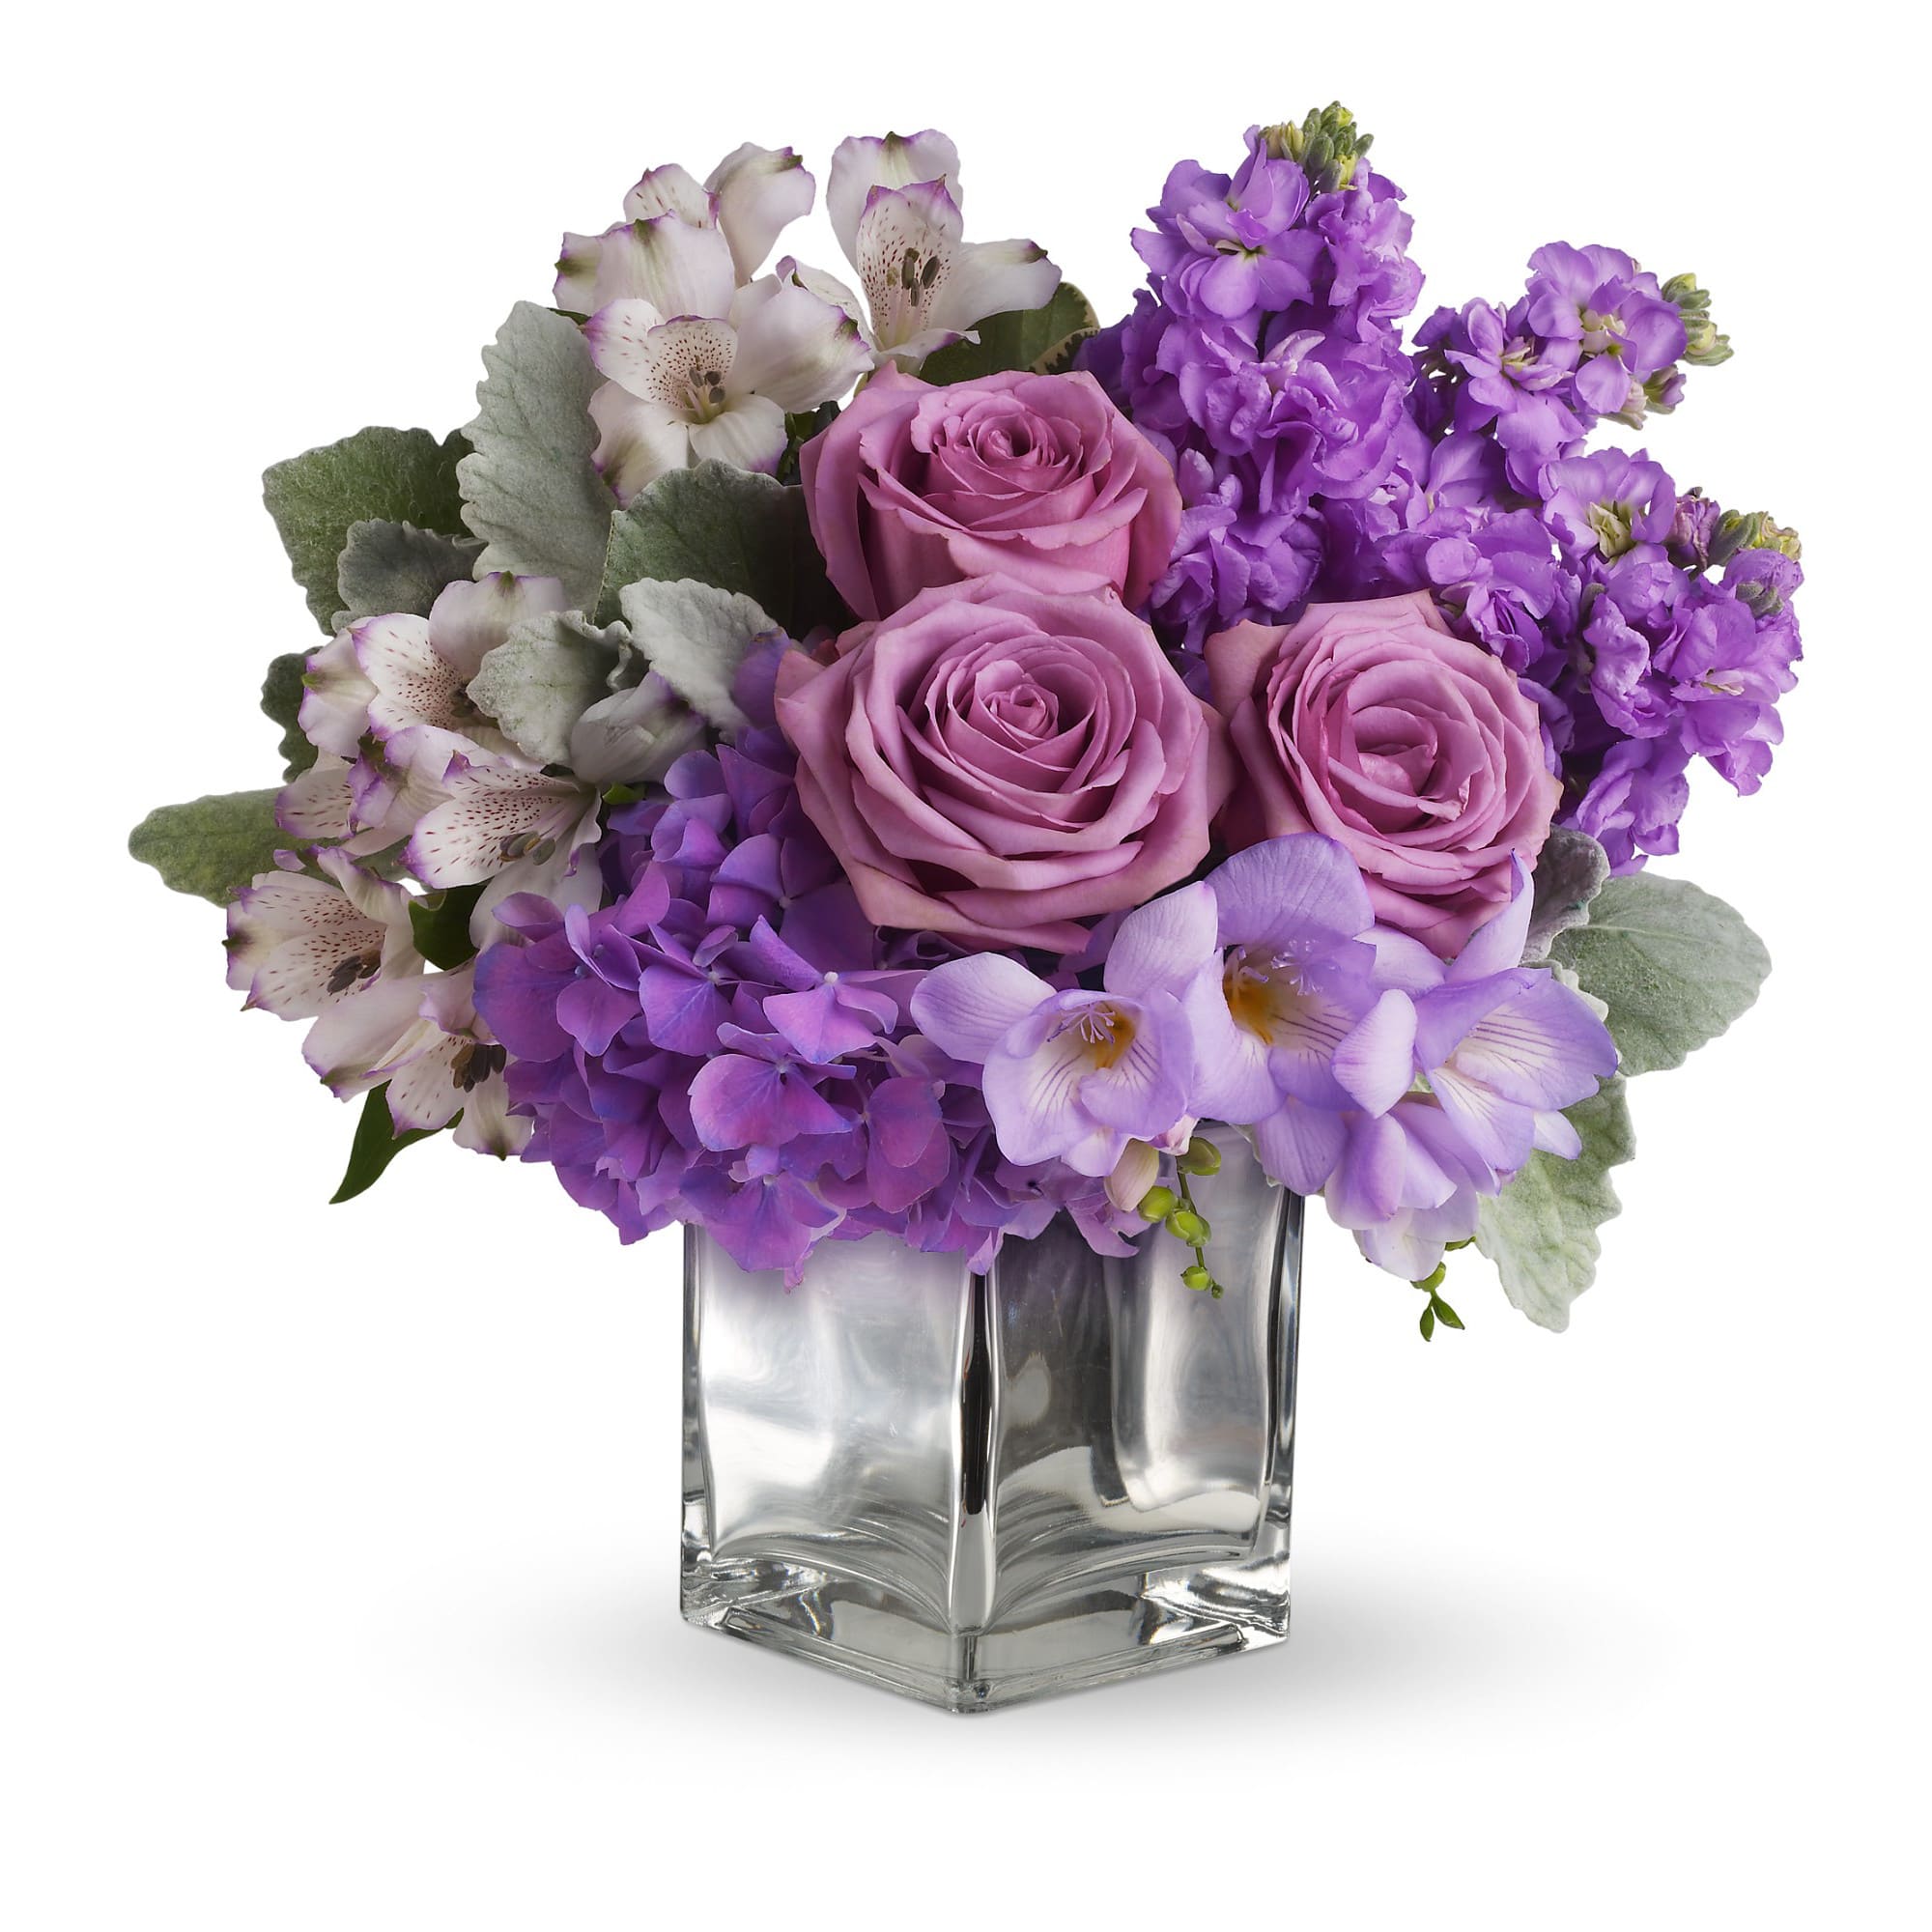 Sweet as Sugar by Teleflora - A Mirrored Silver Cube vase is just one of the things that makes this beautiful bouquet such a sweet gift. It's full of beautiful flowers that are perfectly hand-arranged for maximum impact. 